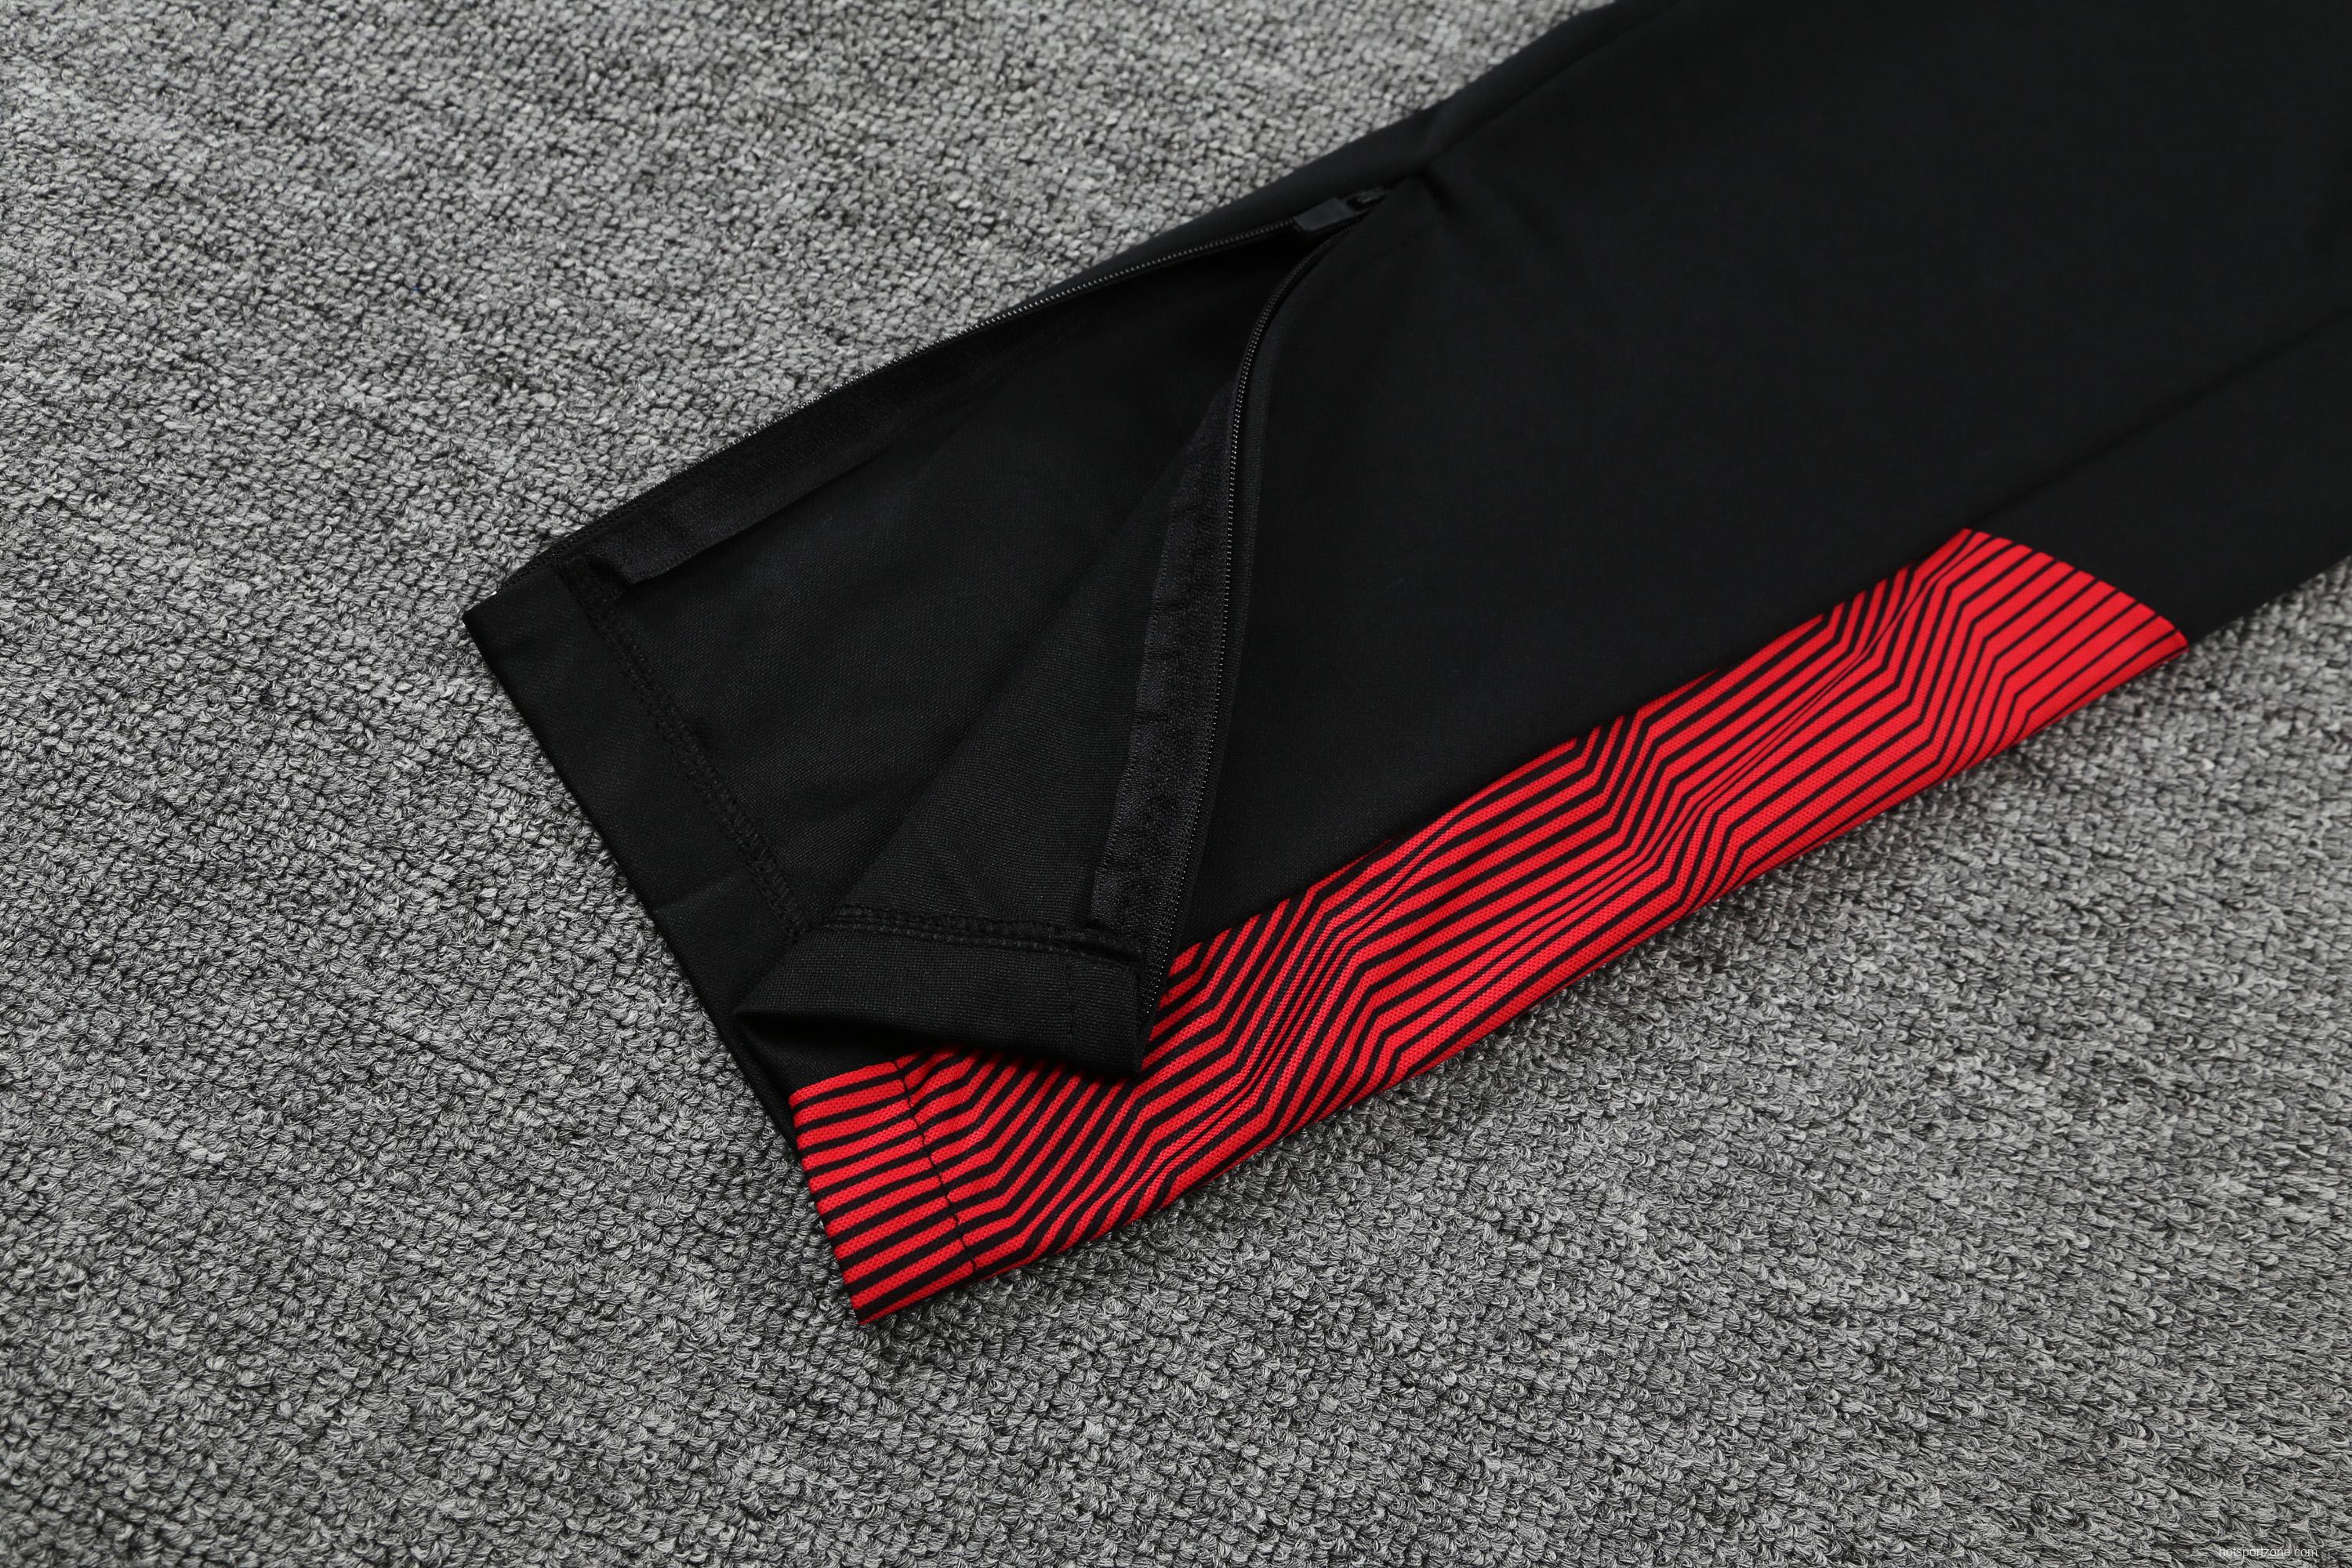 A.C. Milan POLO kit Black (not supported to be sold separately)